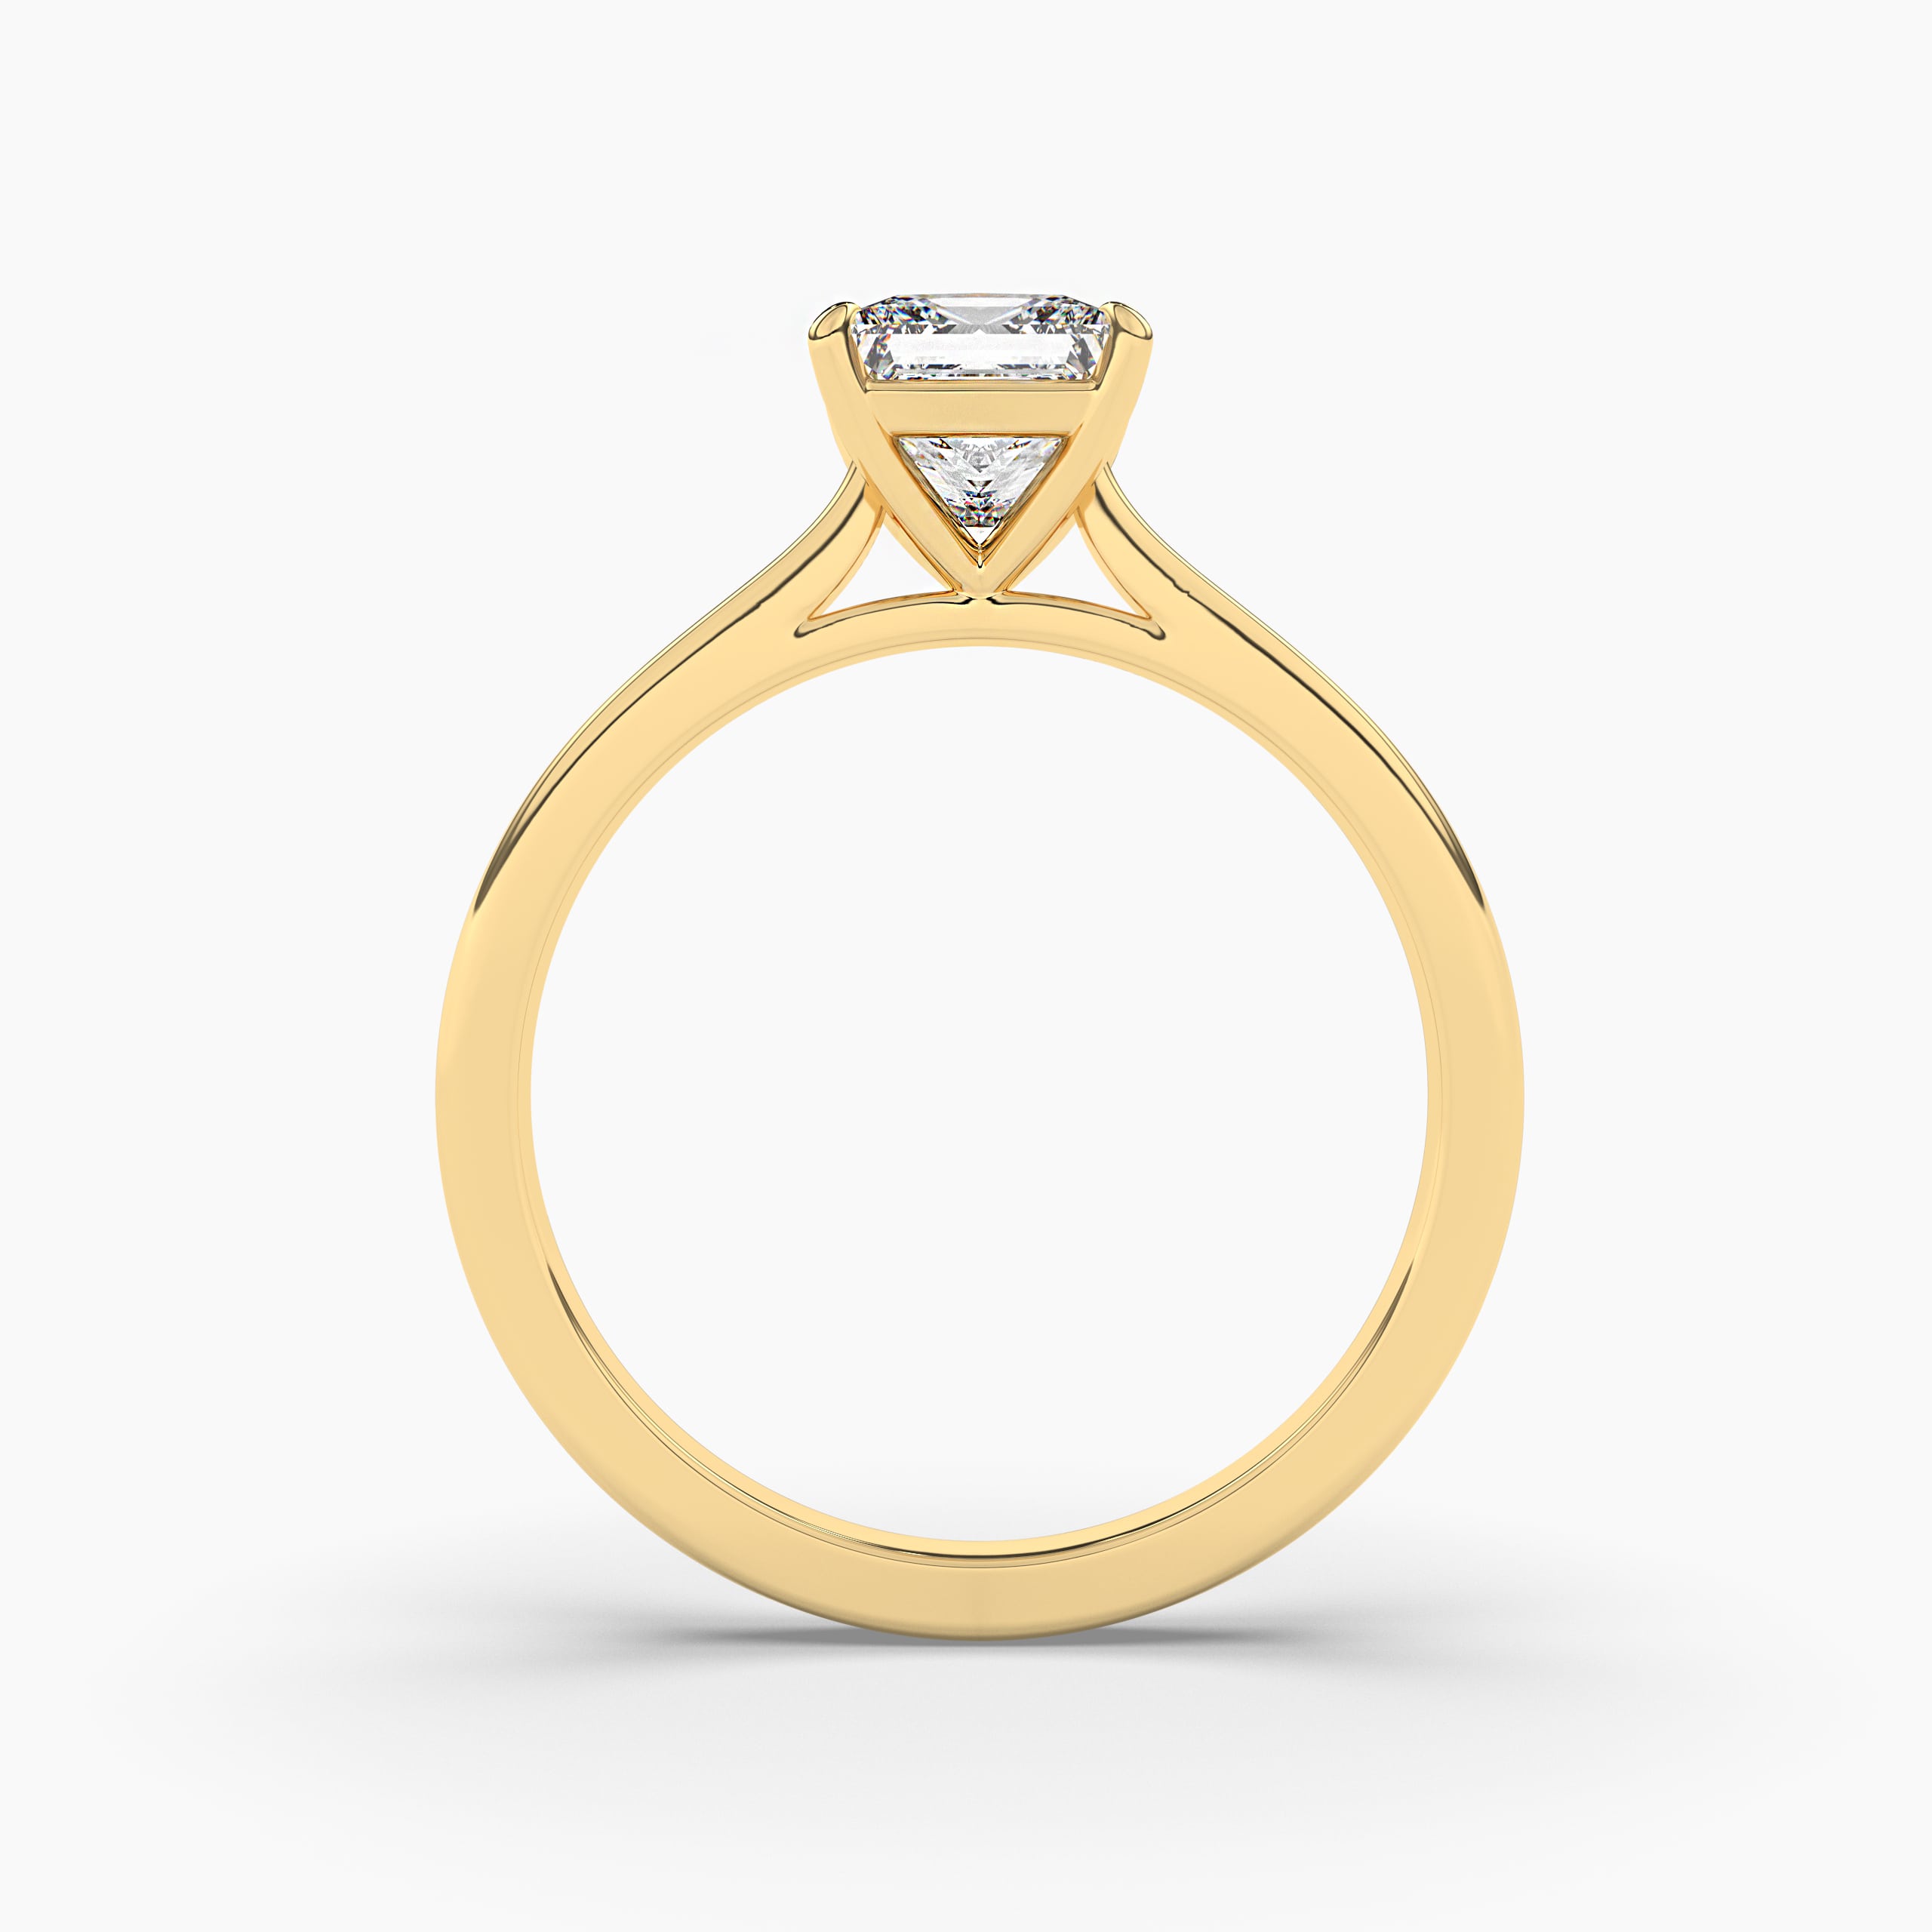 Princess Cut diamond Solitaire Engagement Rings in Yellow Gold